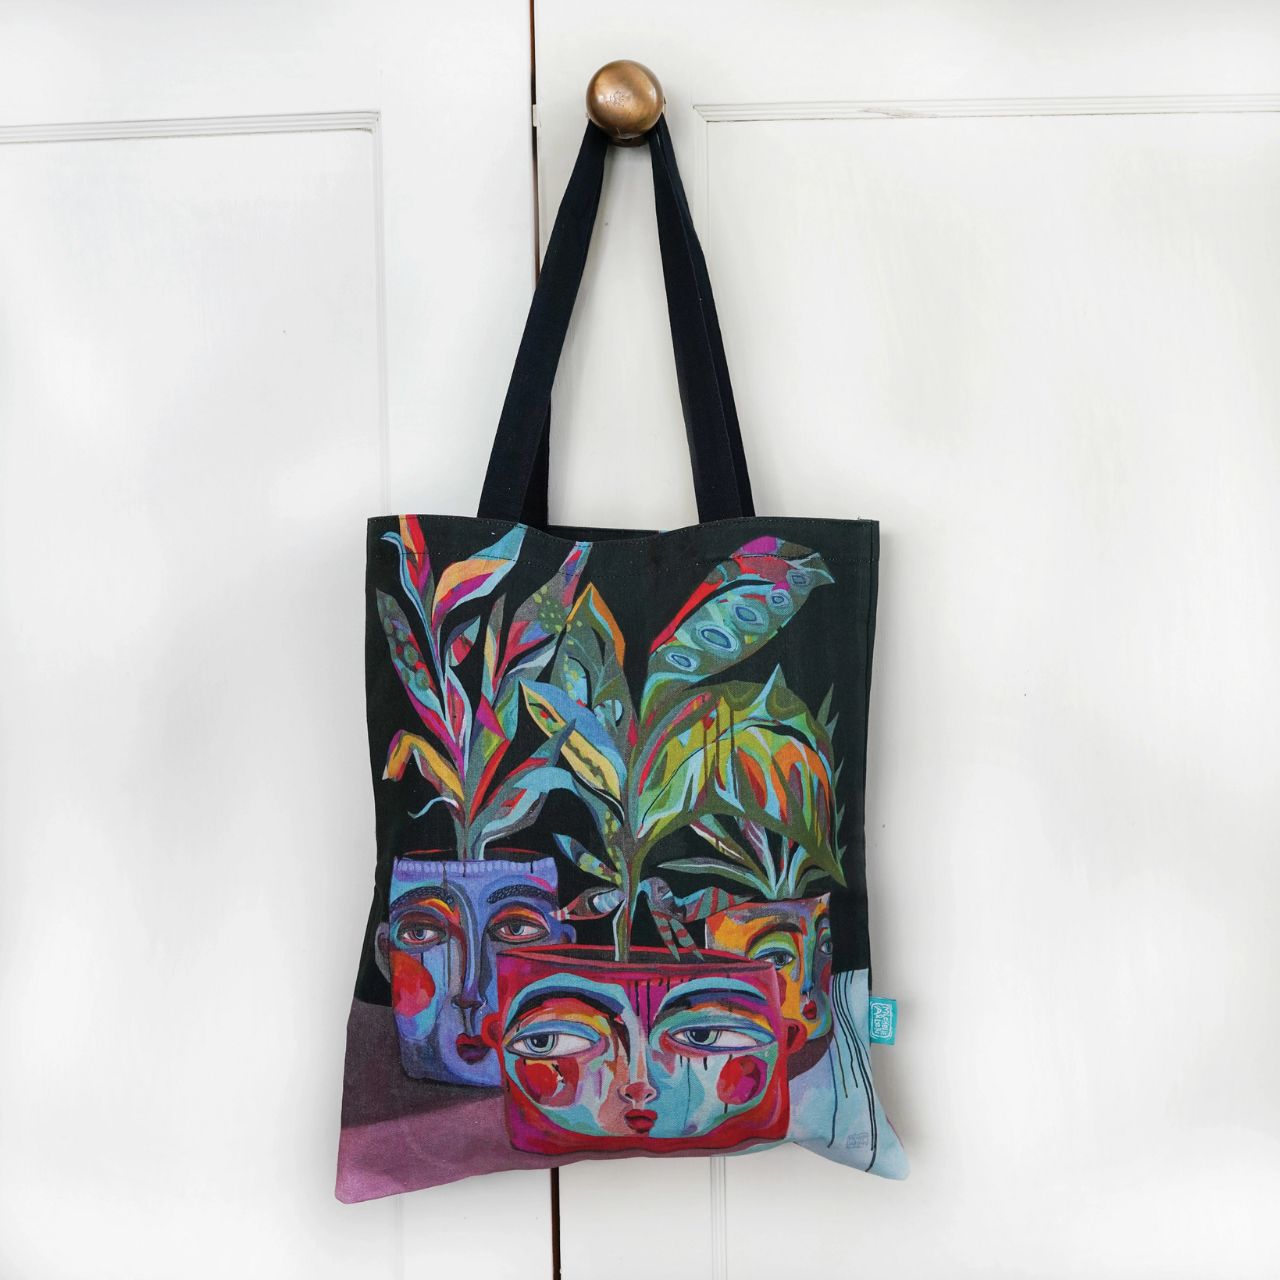 Michelle Allen Grow Boldy Tote Bag  Our Grow Boldly Tote is exactly what you need to carry anything your heart desires. The Tote is the perfect catch-all for running from work to the grocery store, or from home to the zoo.